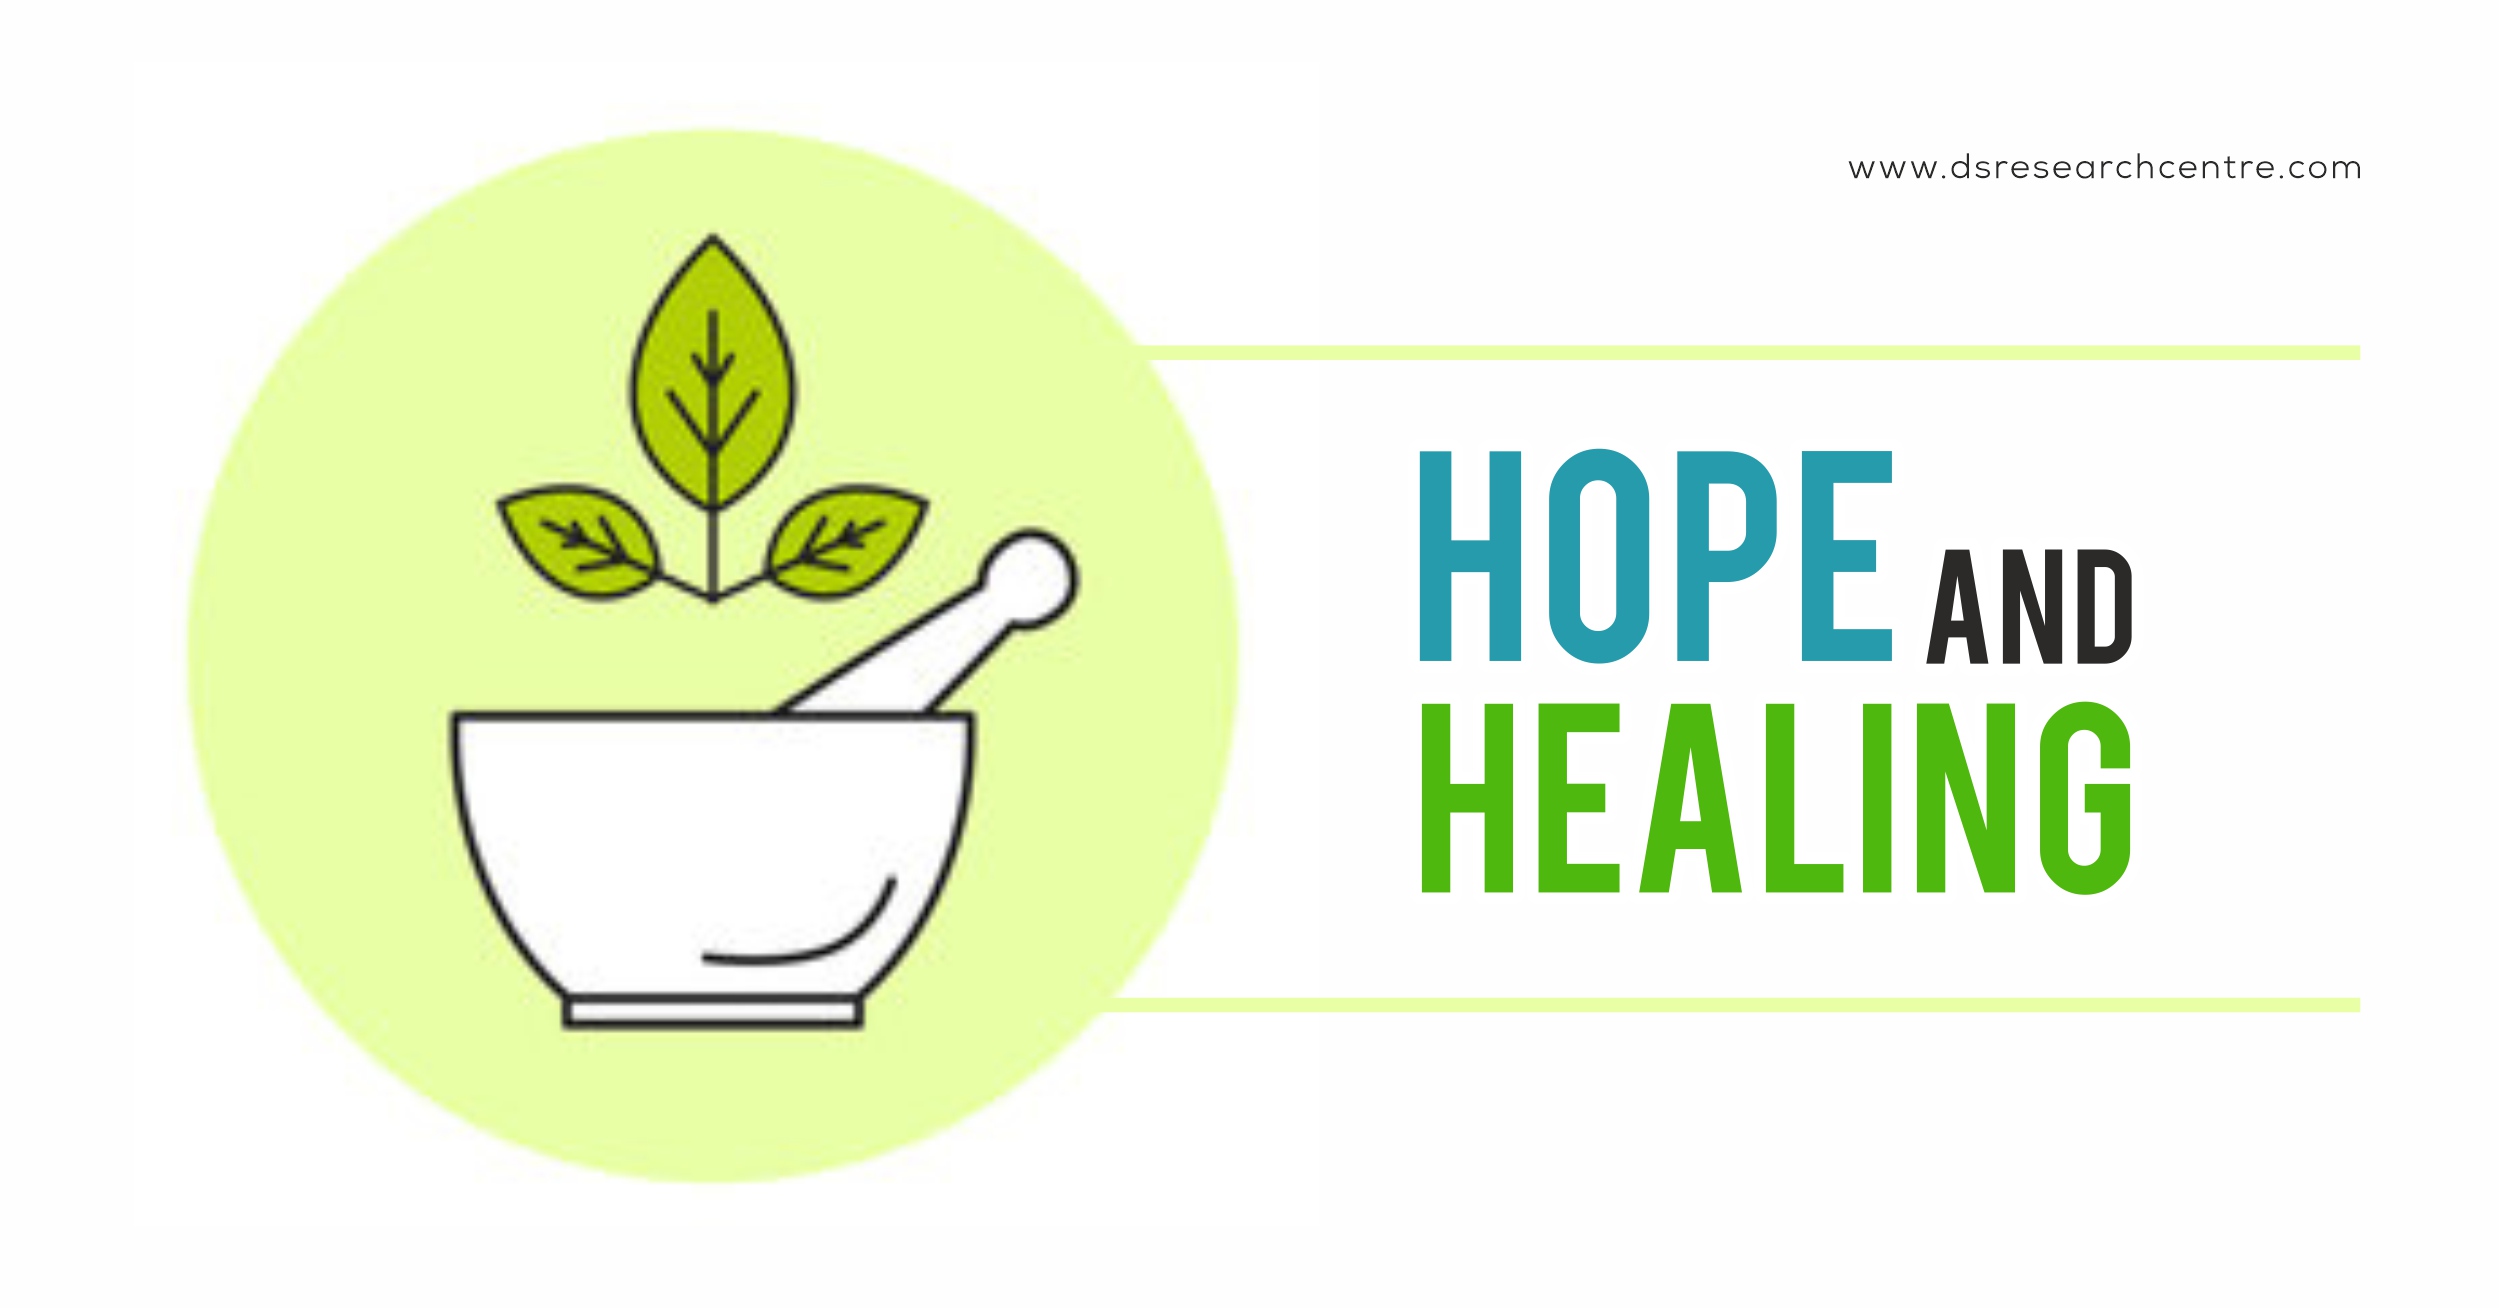 HOPE & HEALING , We are taking steps together in cancer treatment.